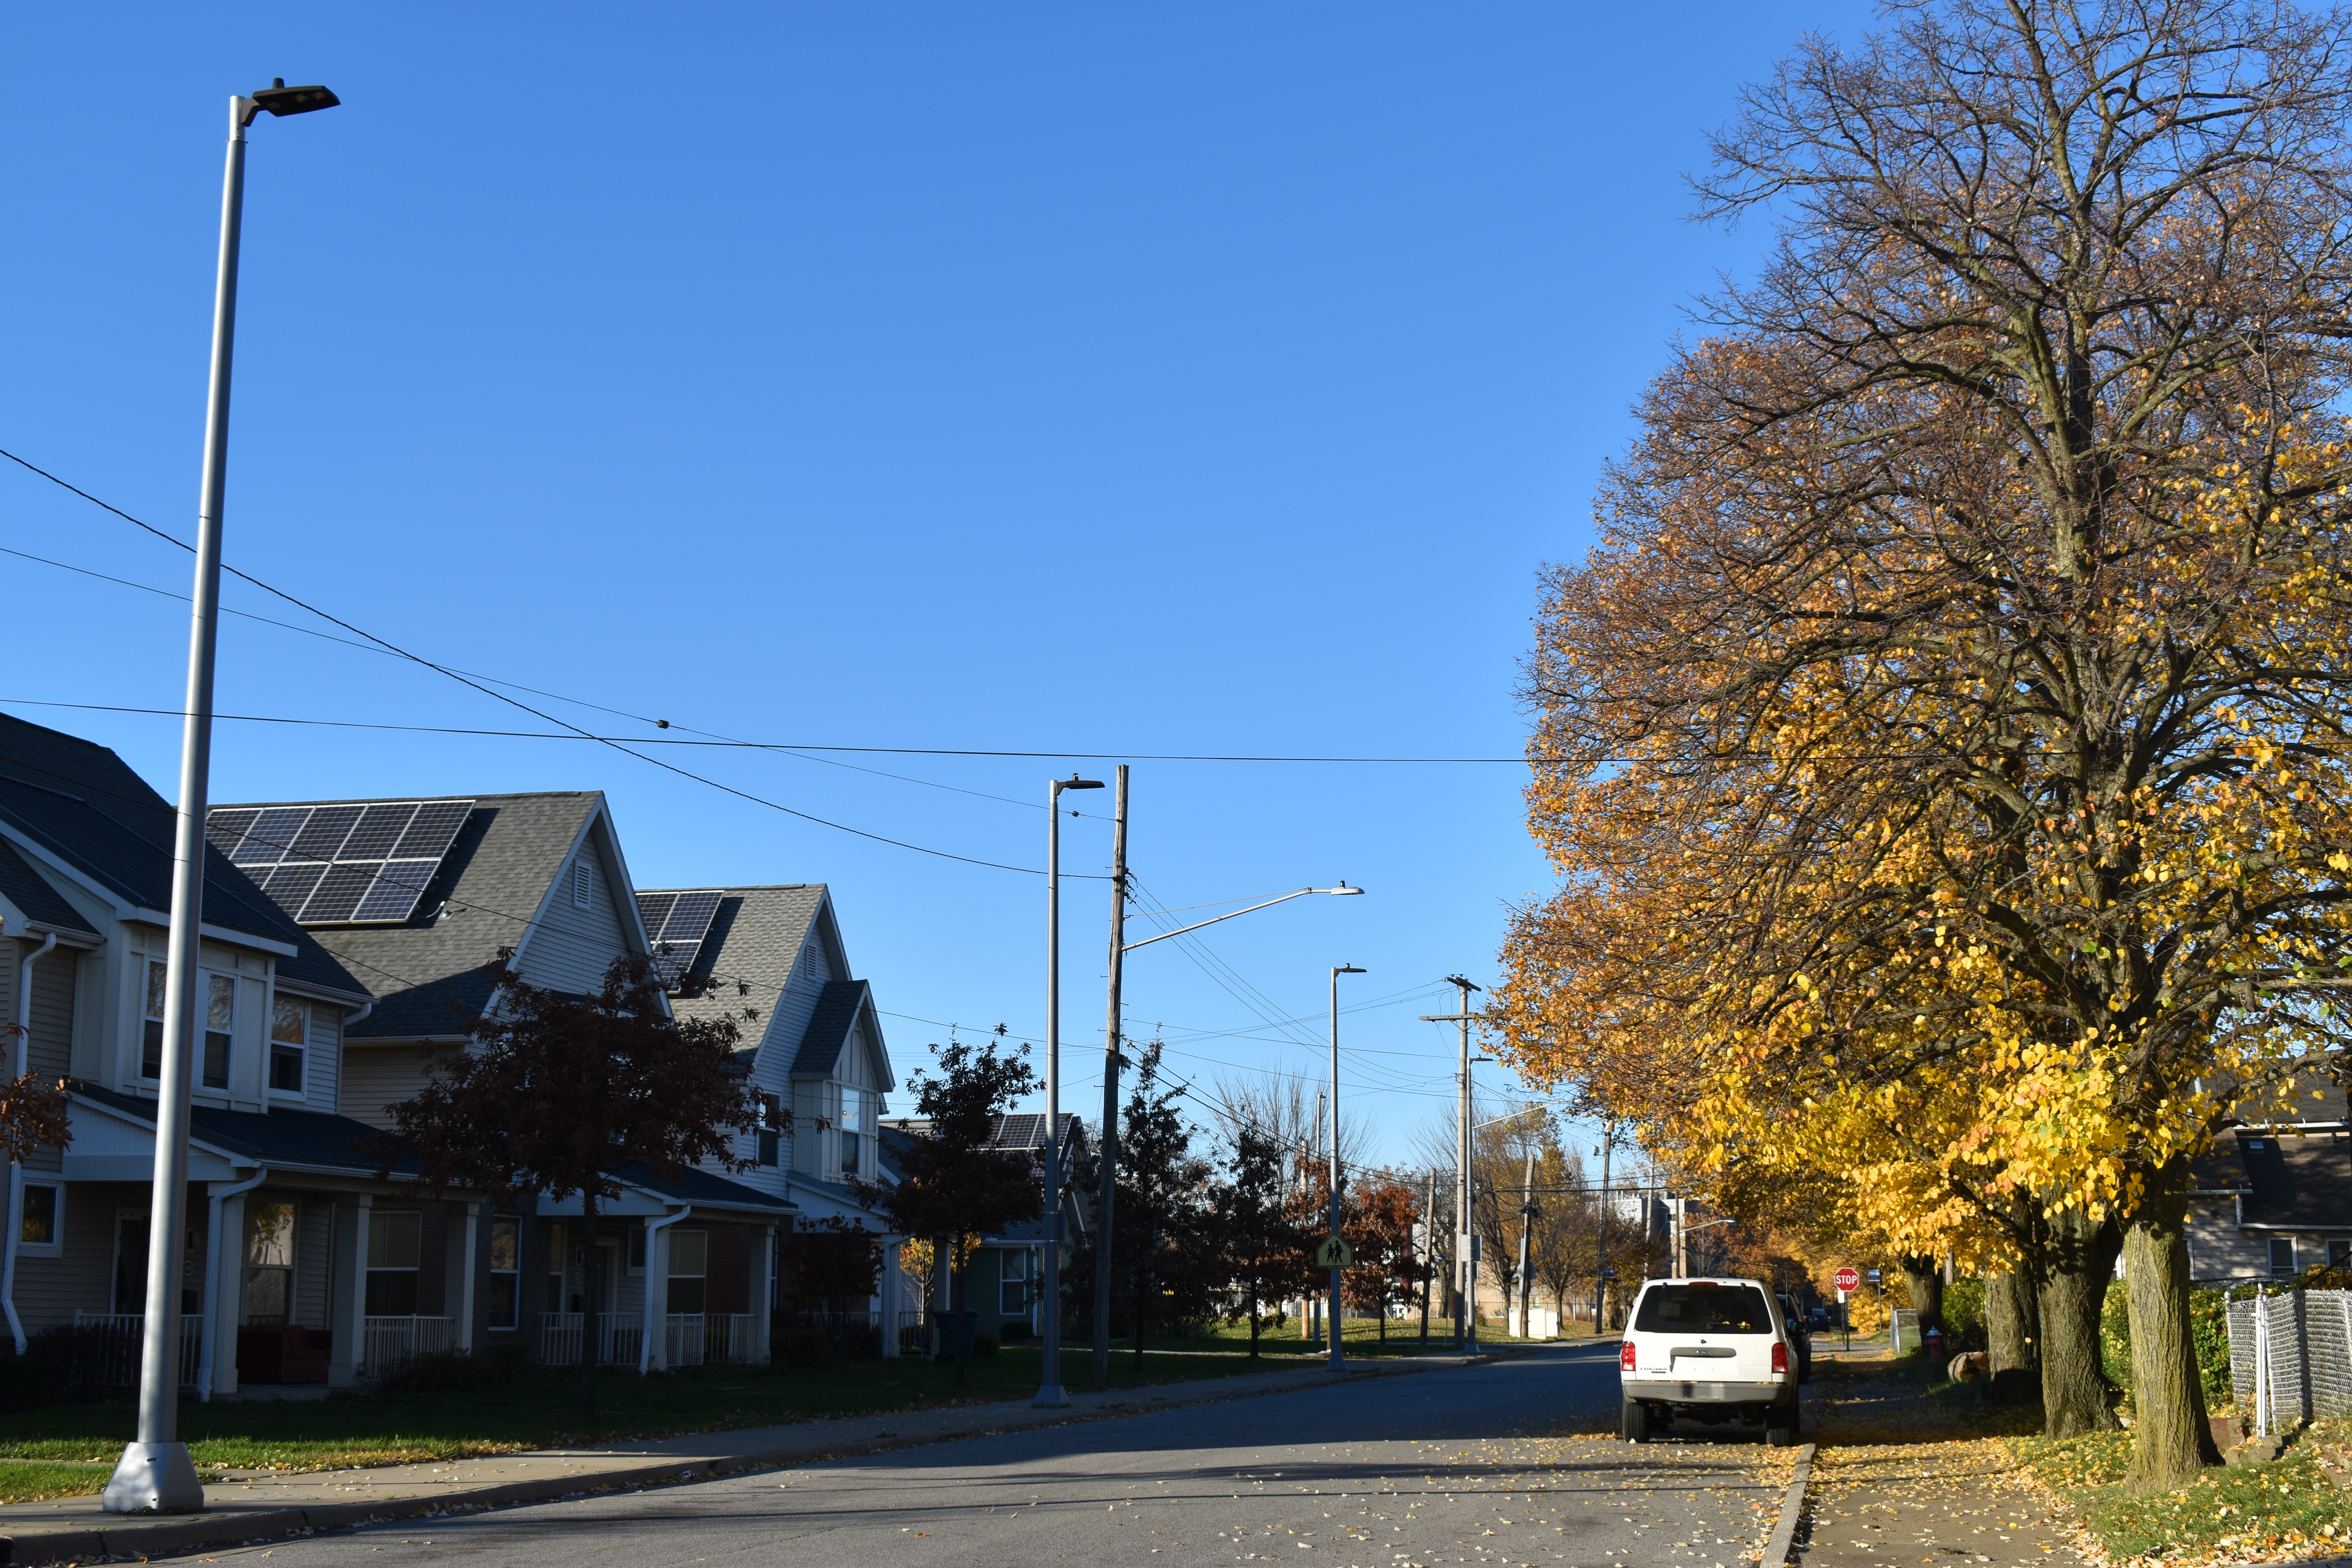 A residential street is lined with tress with changing leaves on the right side, and on the left a row of houses showing solar panels on the roofs.